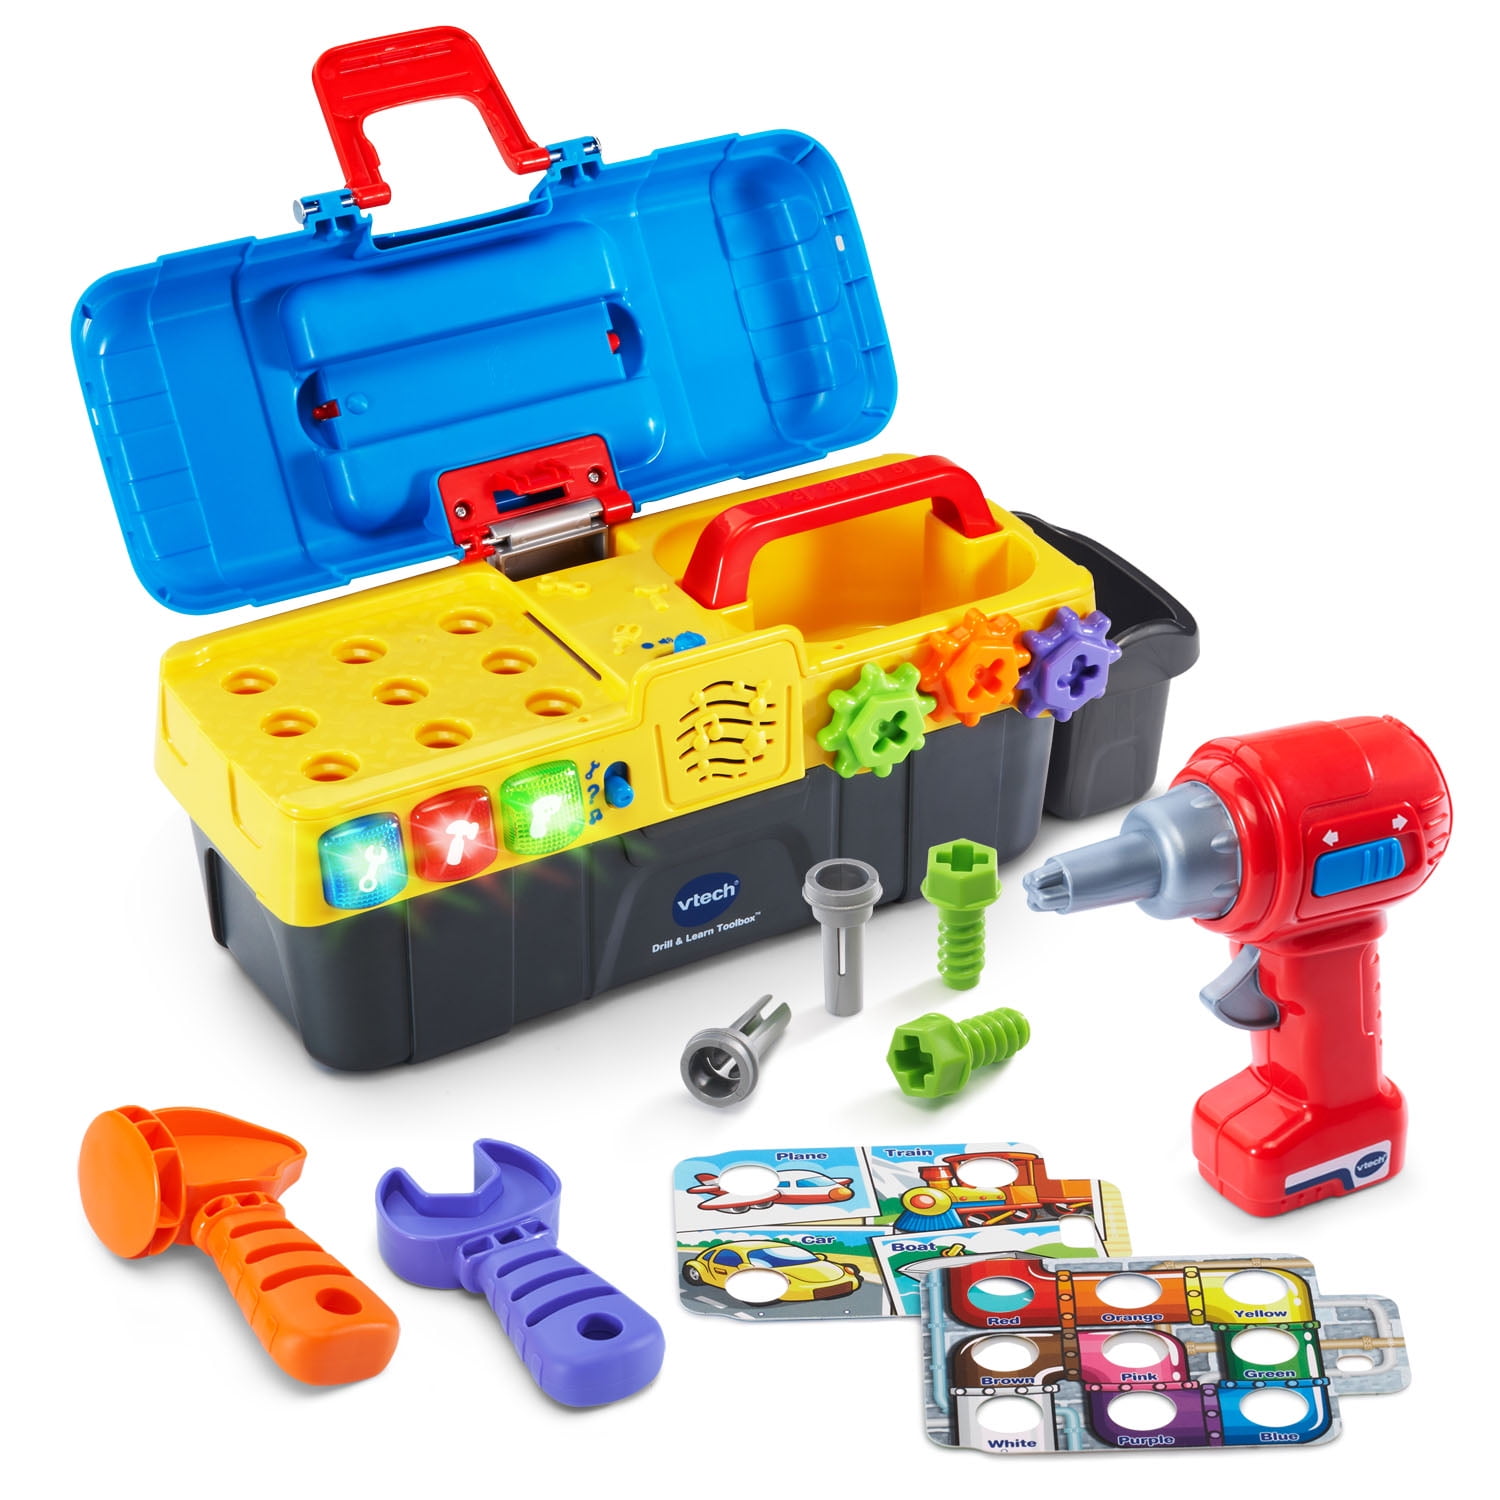 Repair Tools Set Boy Kid Toys Pretend Play Fixing Recognize Color Learning tools 